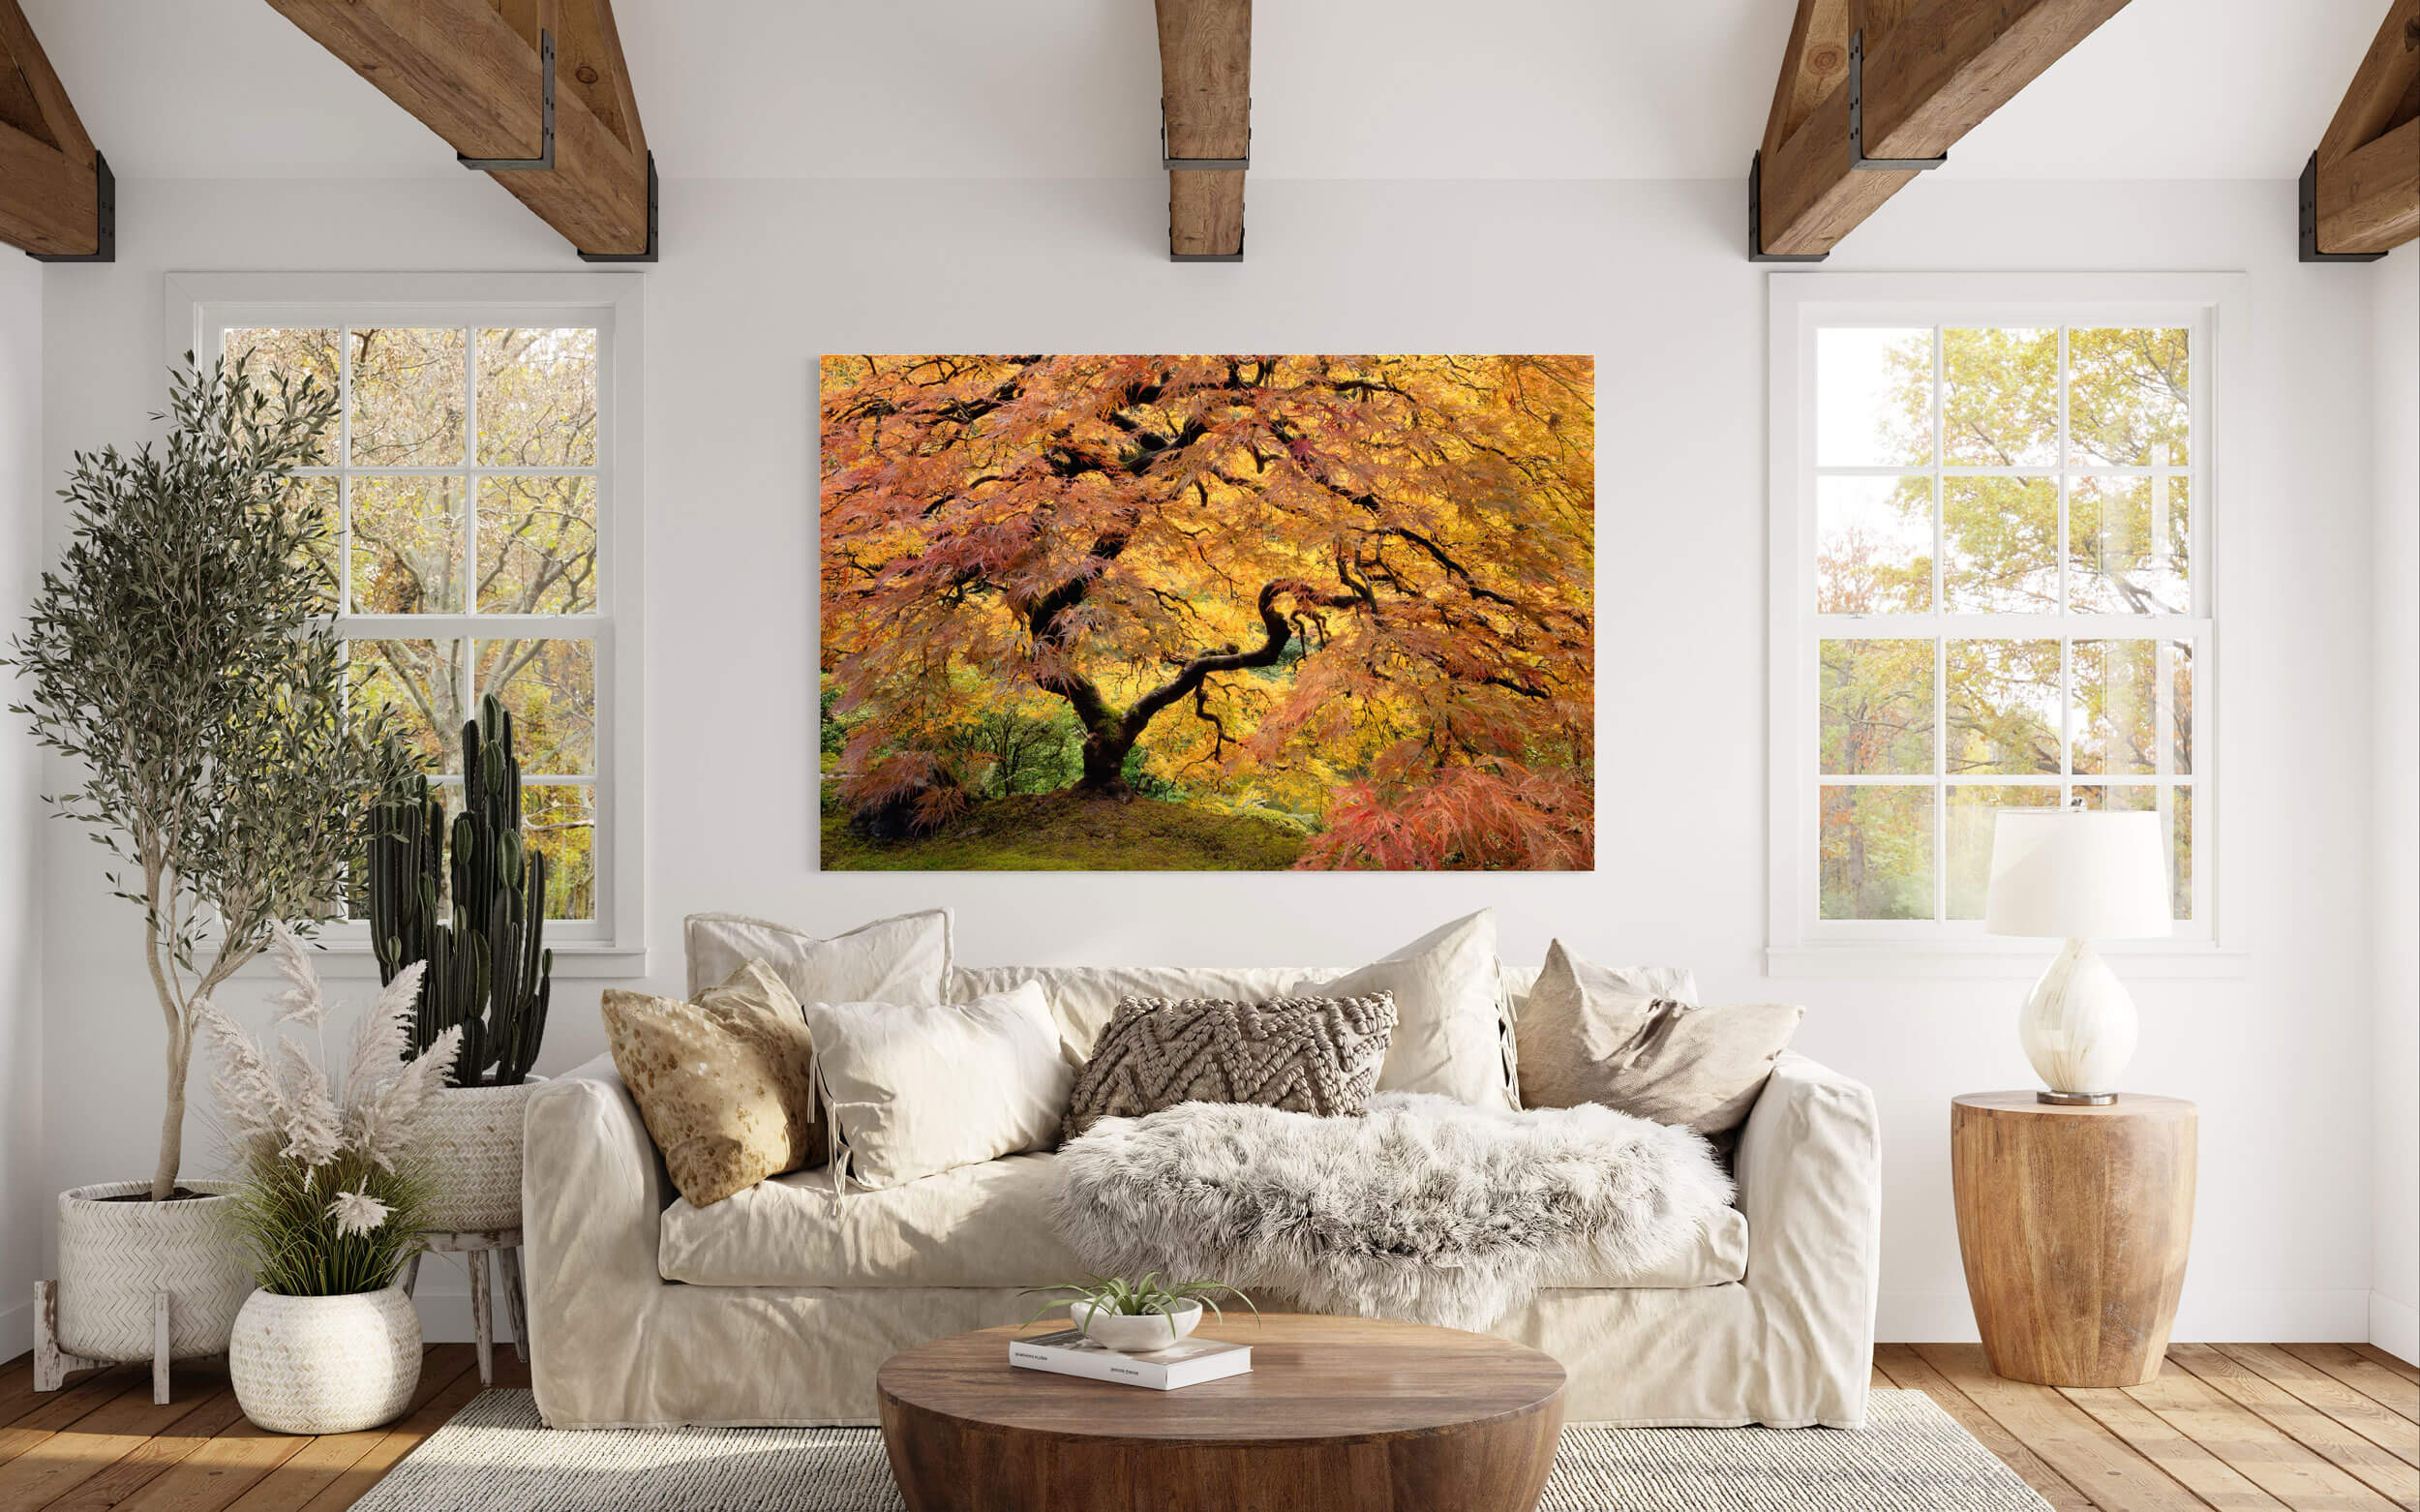 A picture of the maple tree in the Portland Japanese Garden hangs in a living room.